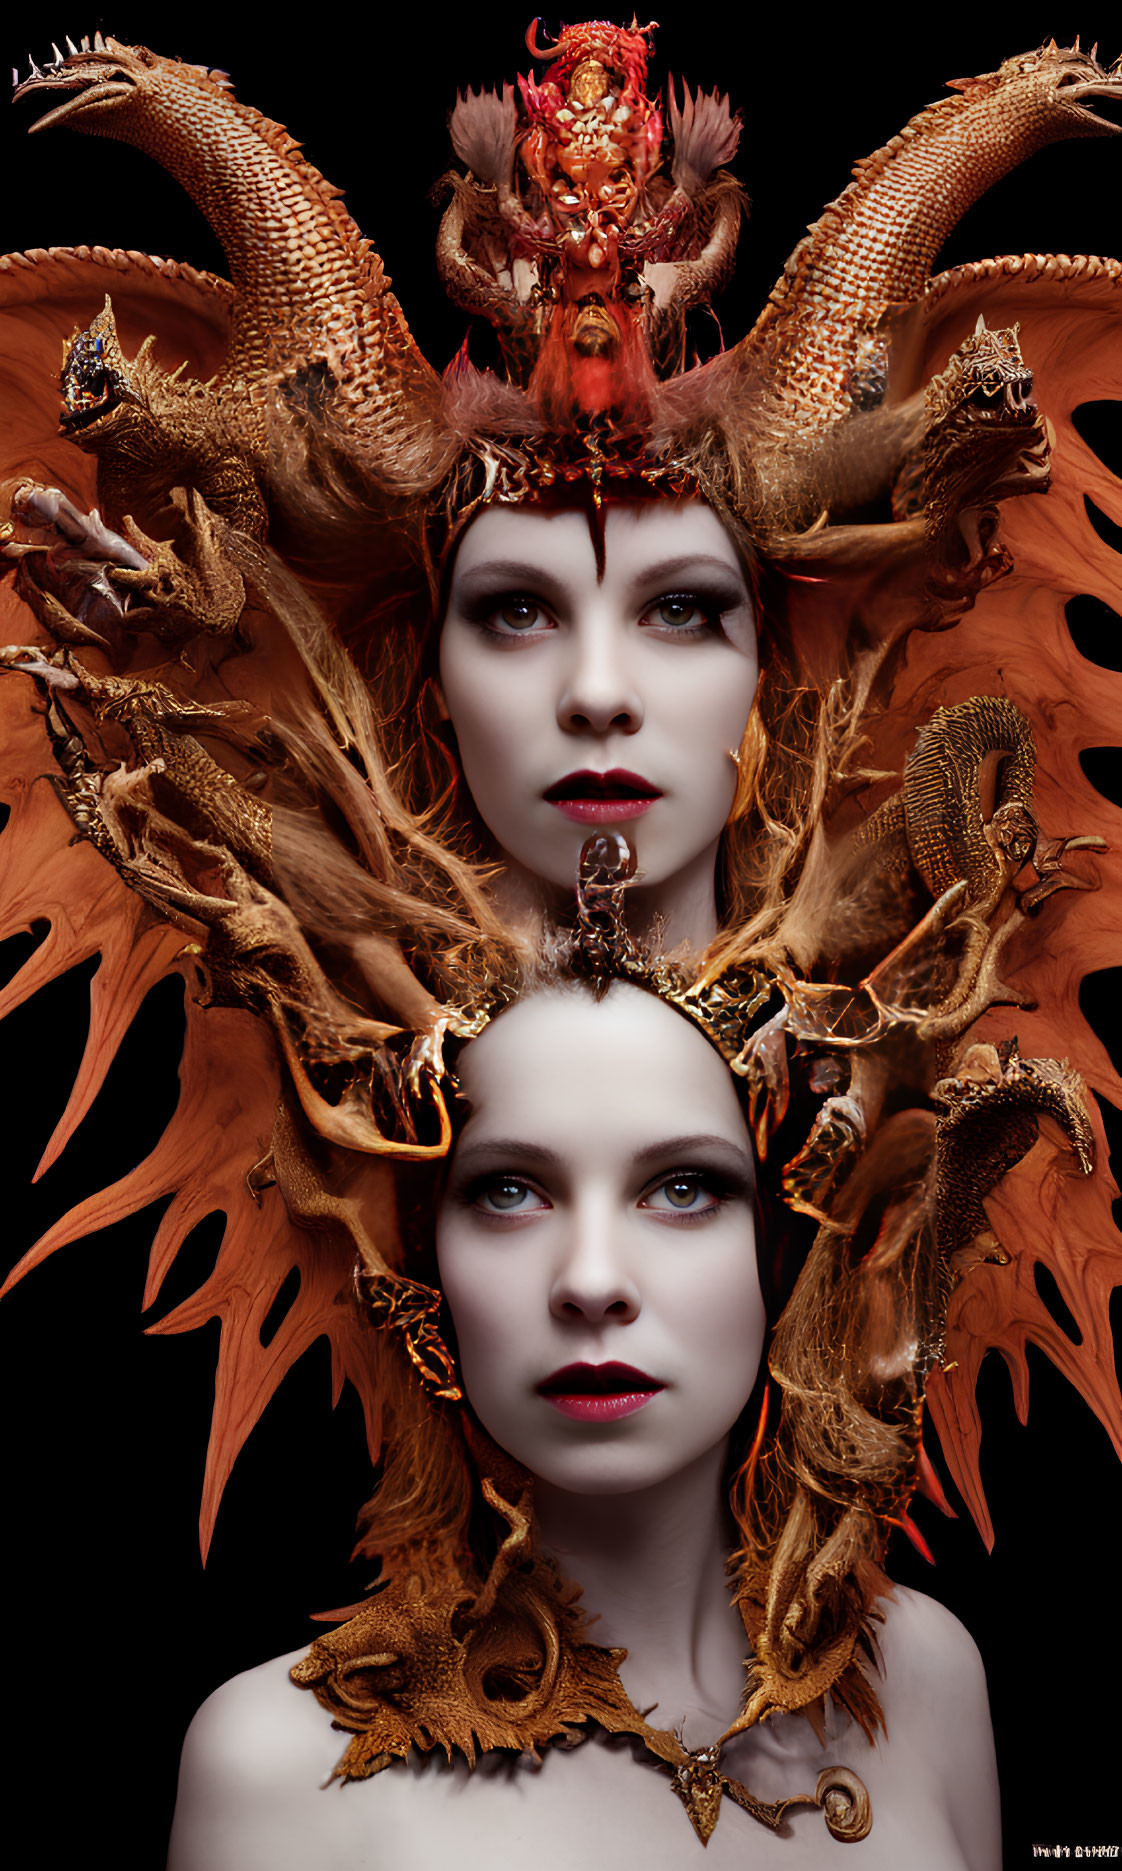 Stylized portrait of two women with dragon-themed headpieces on black background